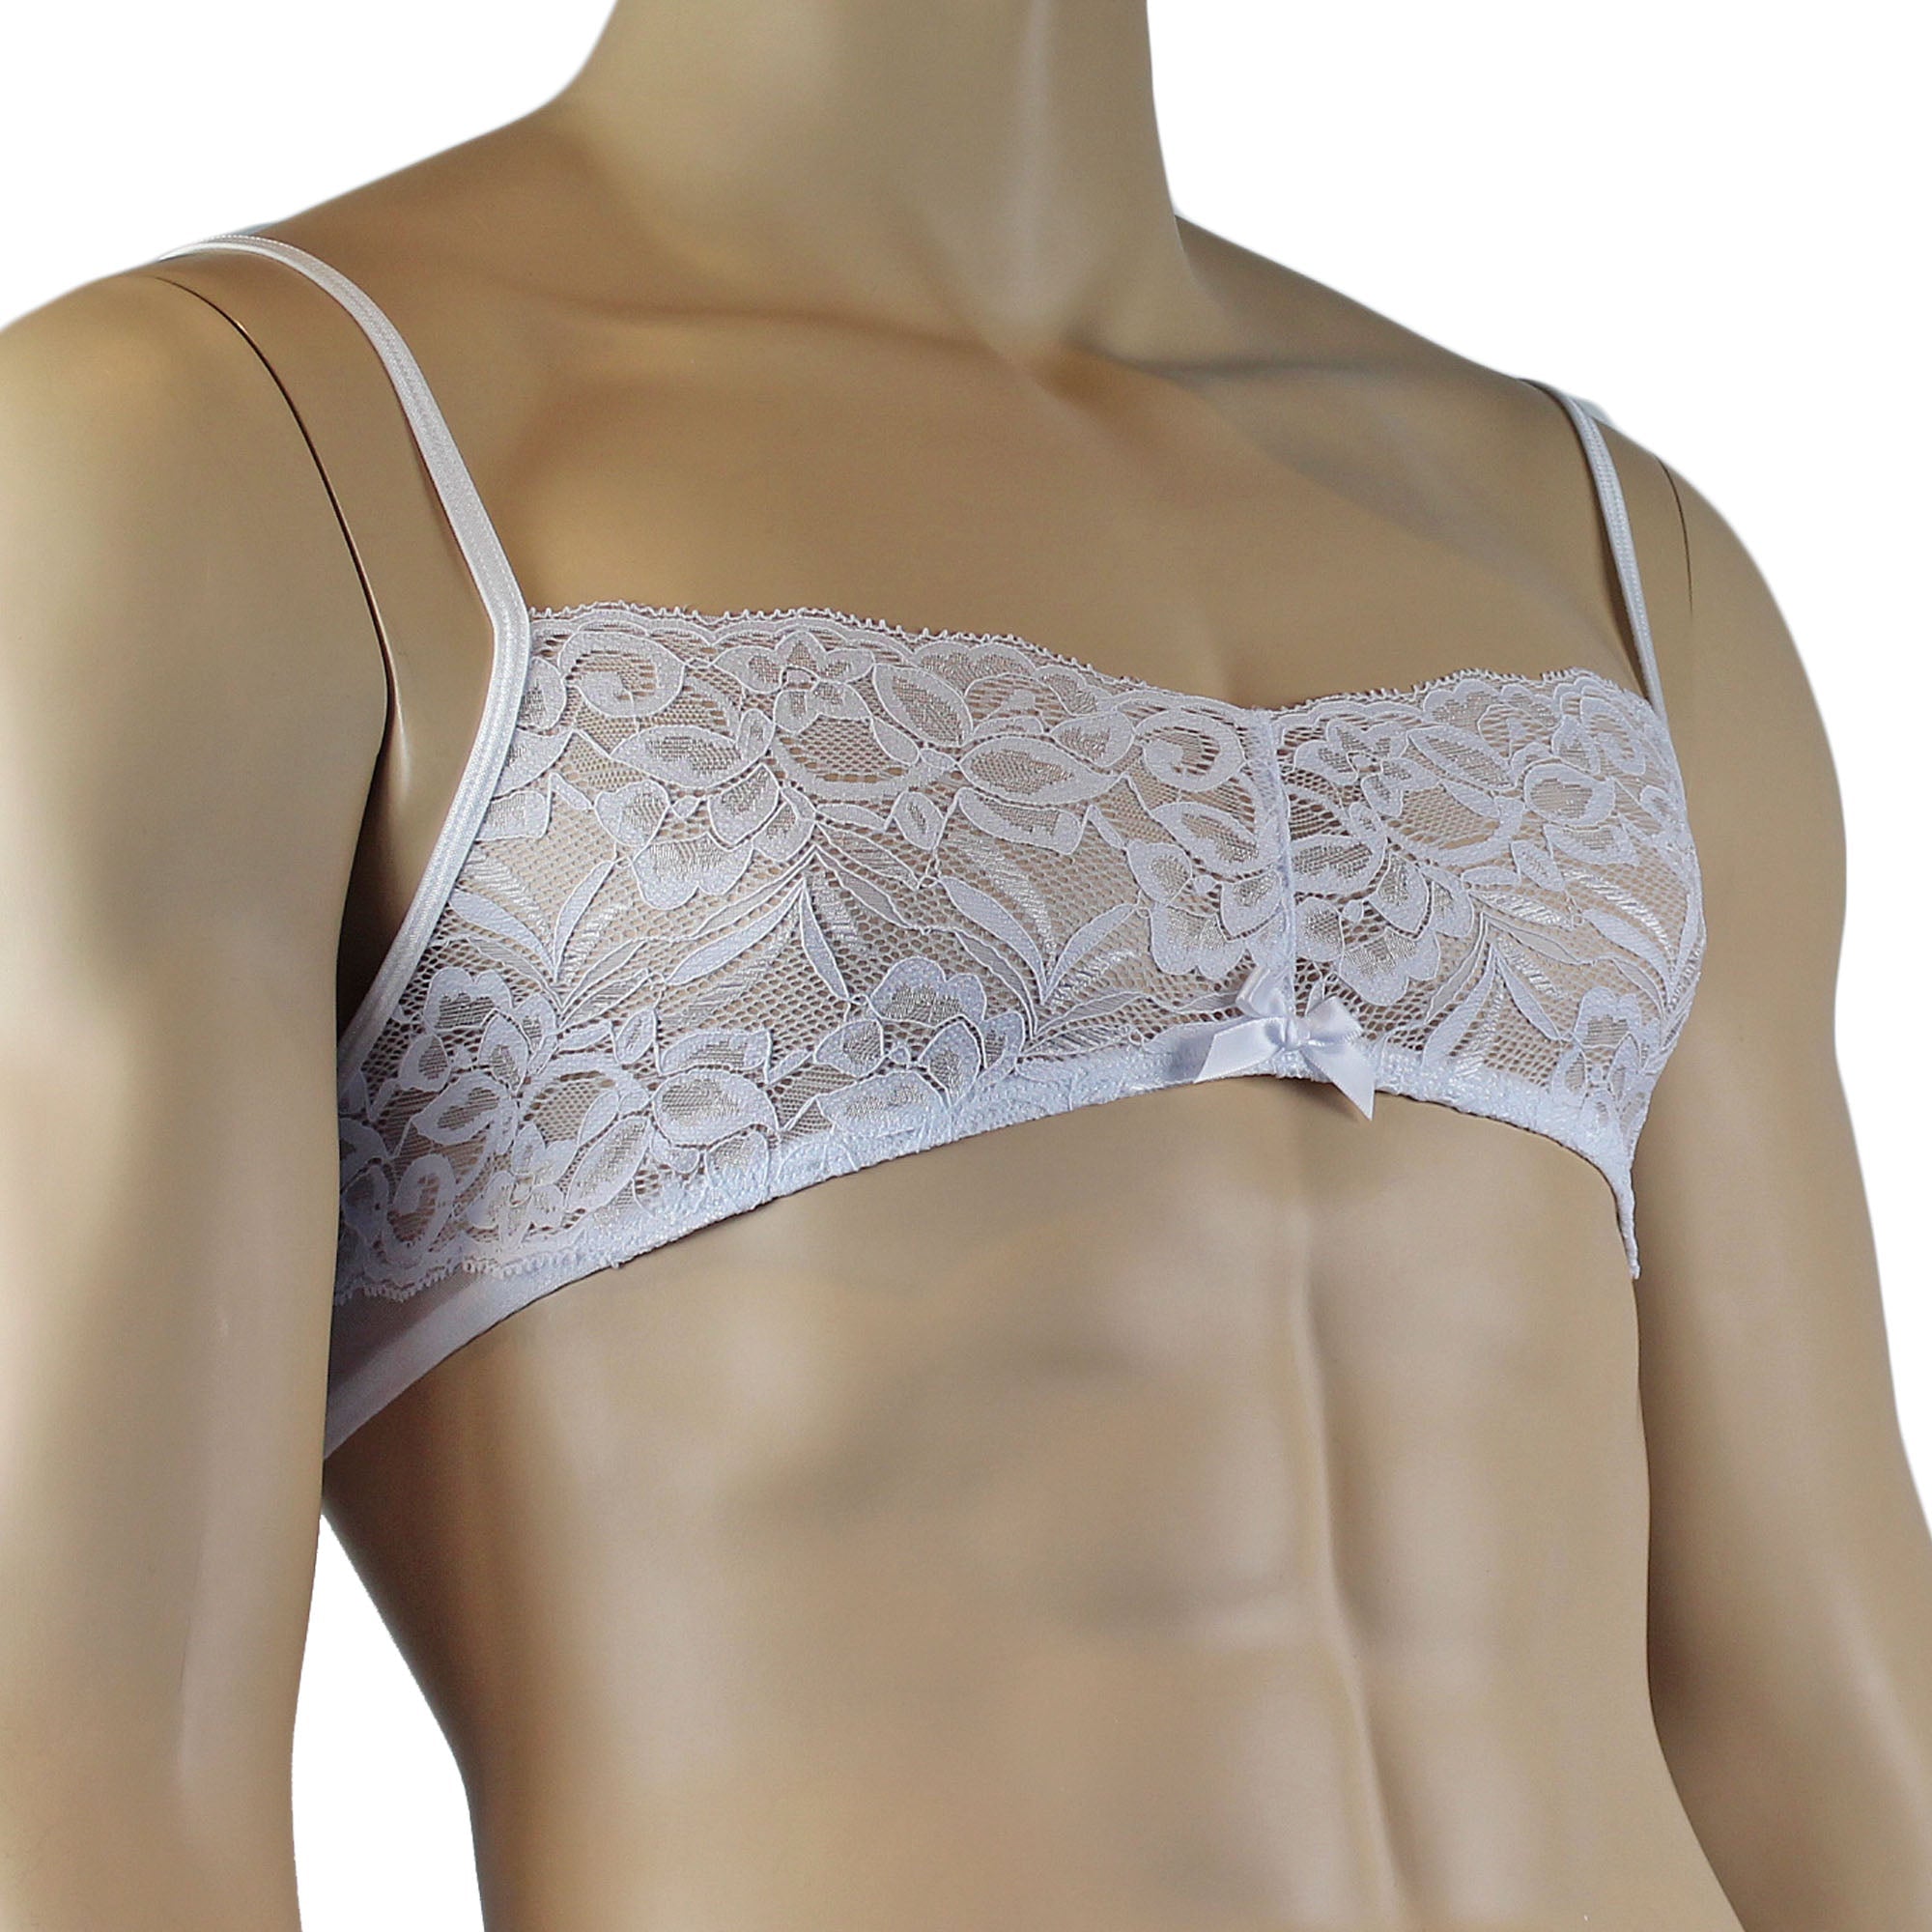 Mens Kristy Lace & Mesh Bra Top with thin Straps White